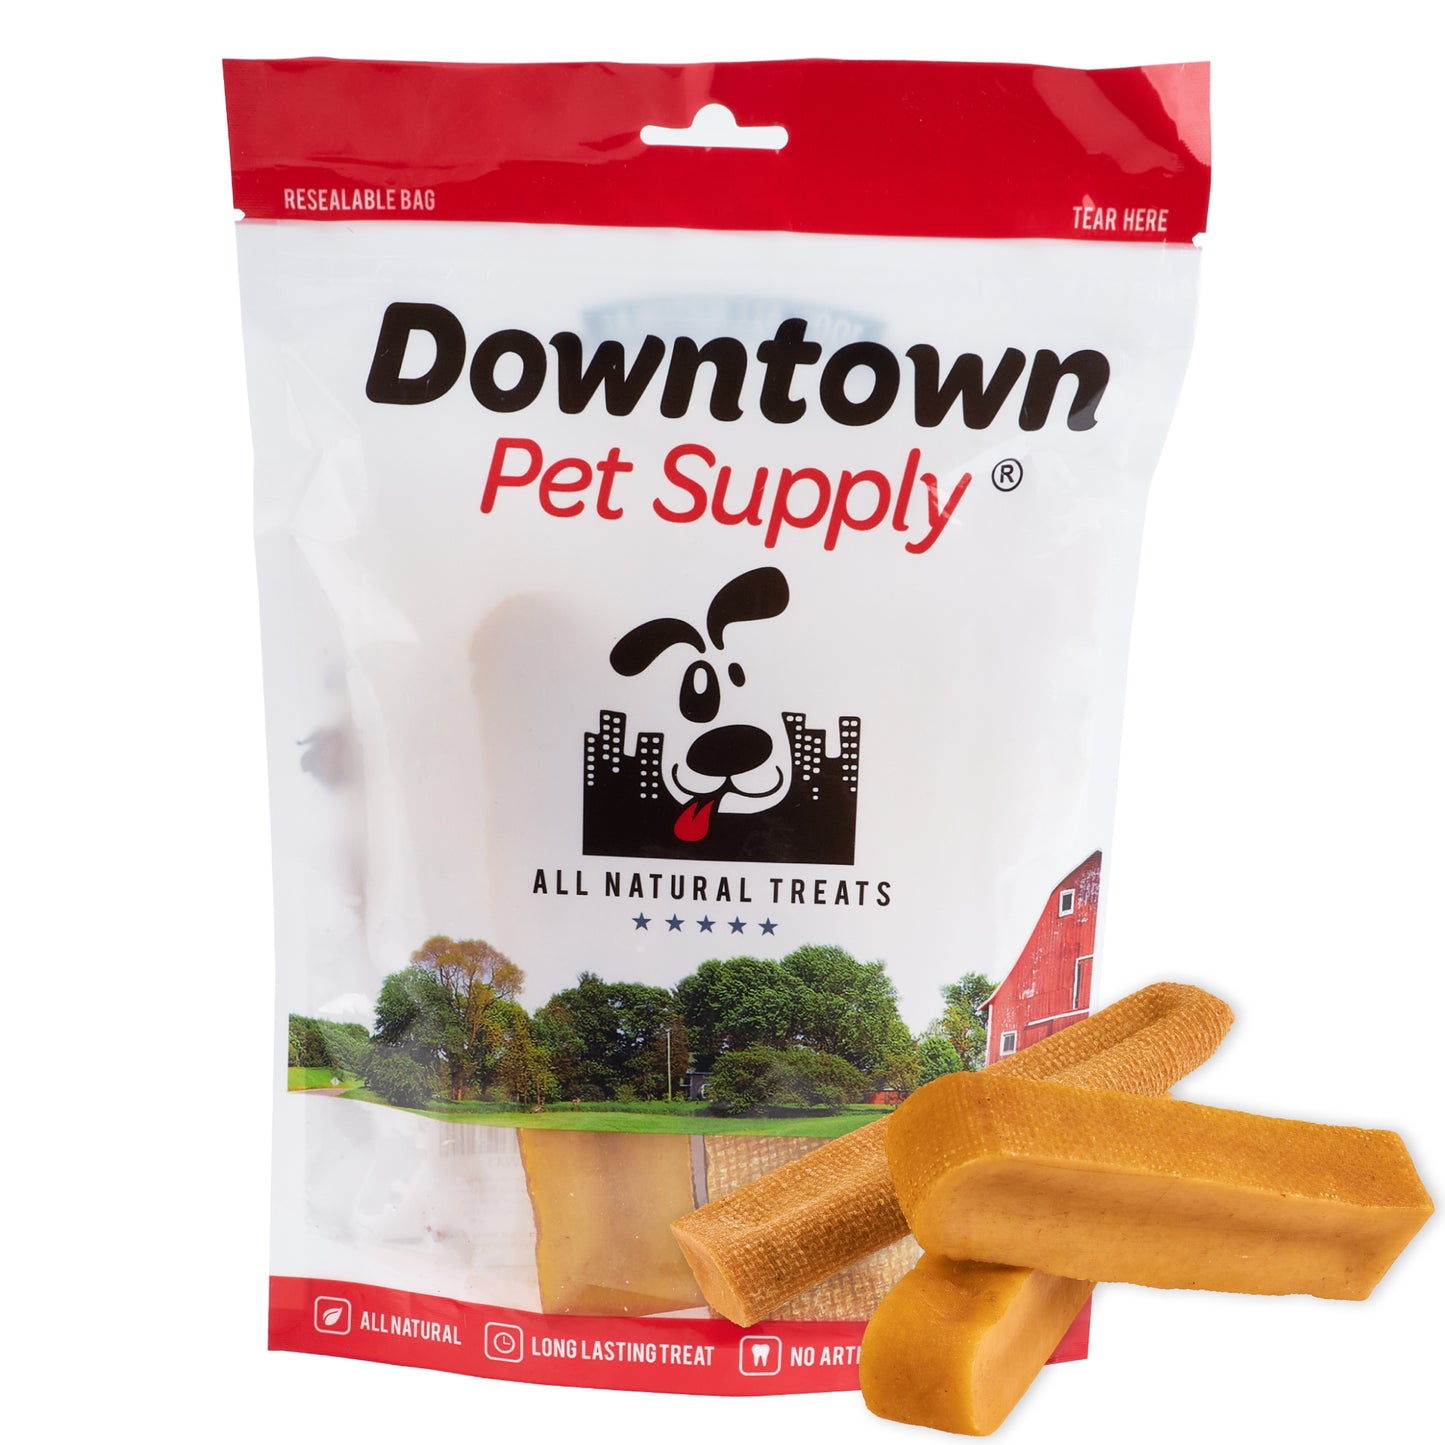 Yak Chews for Dogs from the Himalayan Mountains - Value Packs